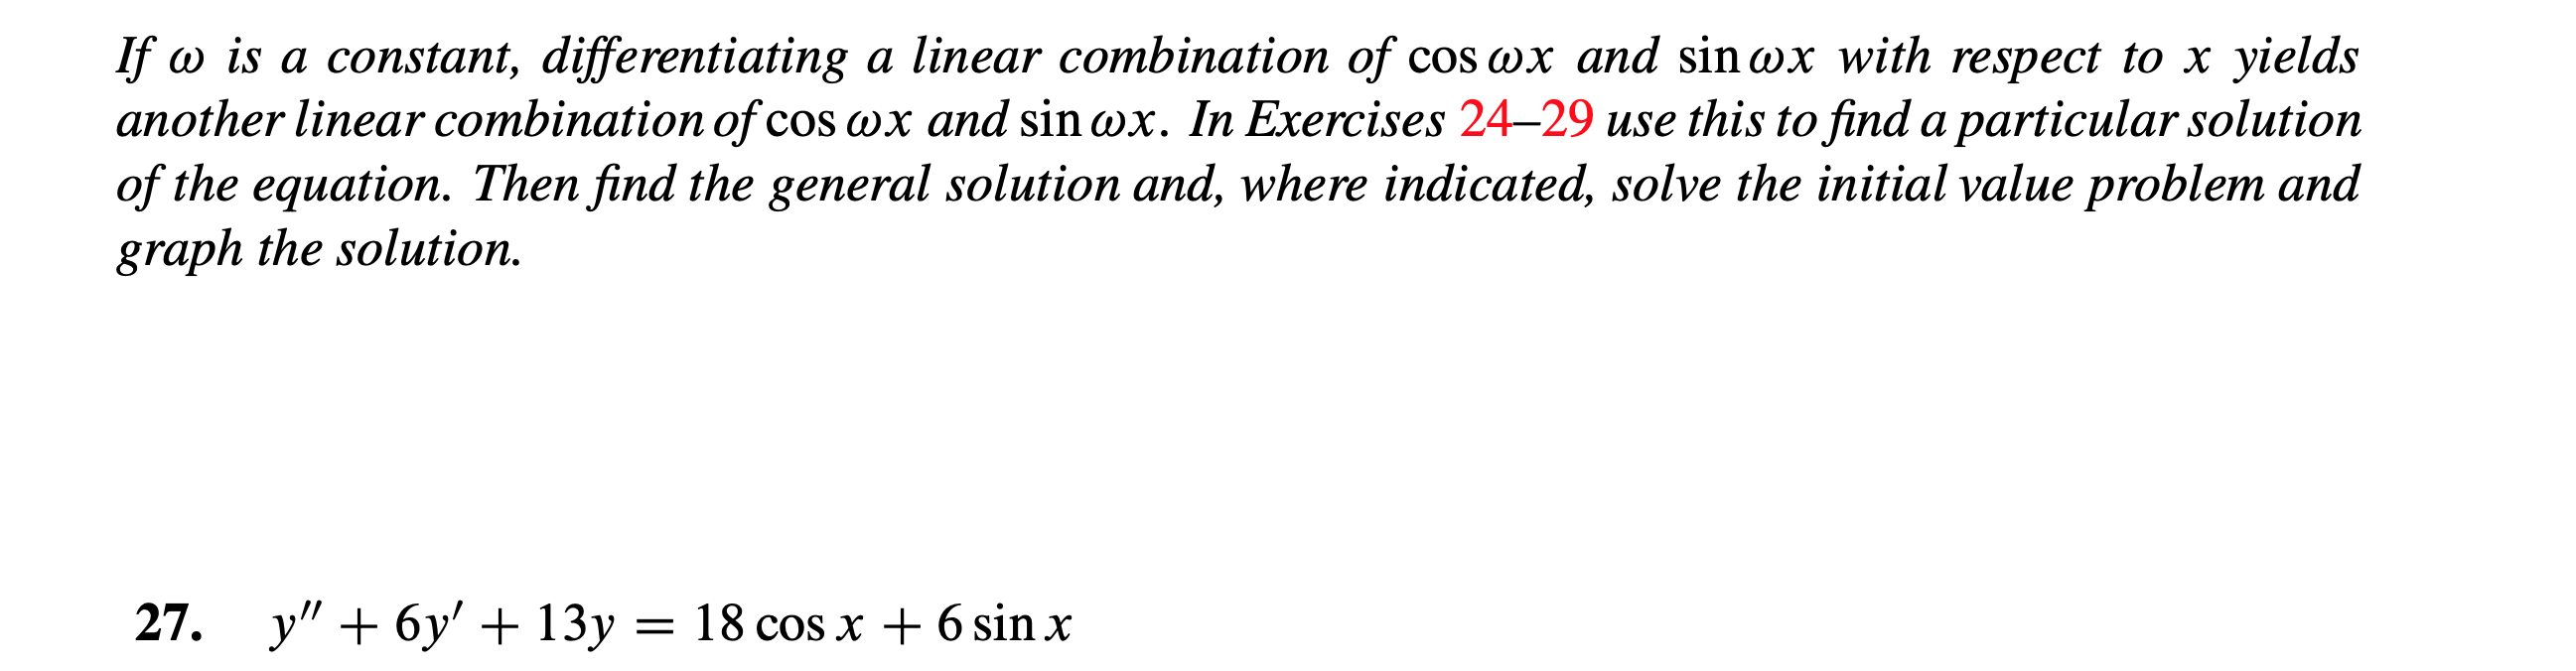 If is a constant, differentiating a linear combination of cos wx and sinox with respect to x yields
another linear combination of cos wx and sin wx. In Exercises 24-29 use this to find a particular solution
of the equation. Then find the general solution and, where indicated, solve the initial value problem and
graph the solution.
y6y3=
27.
= 18 cos x 6 sin x
